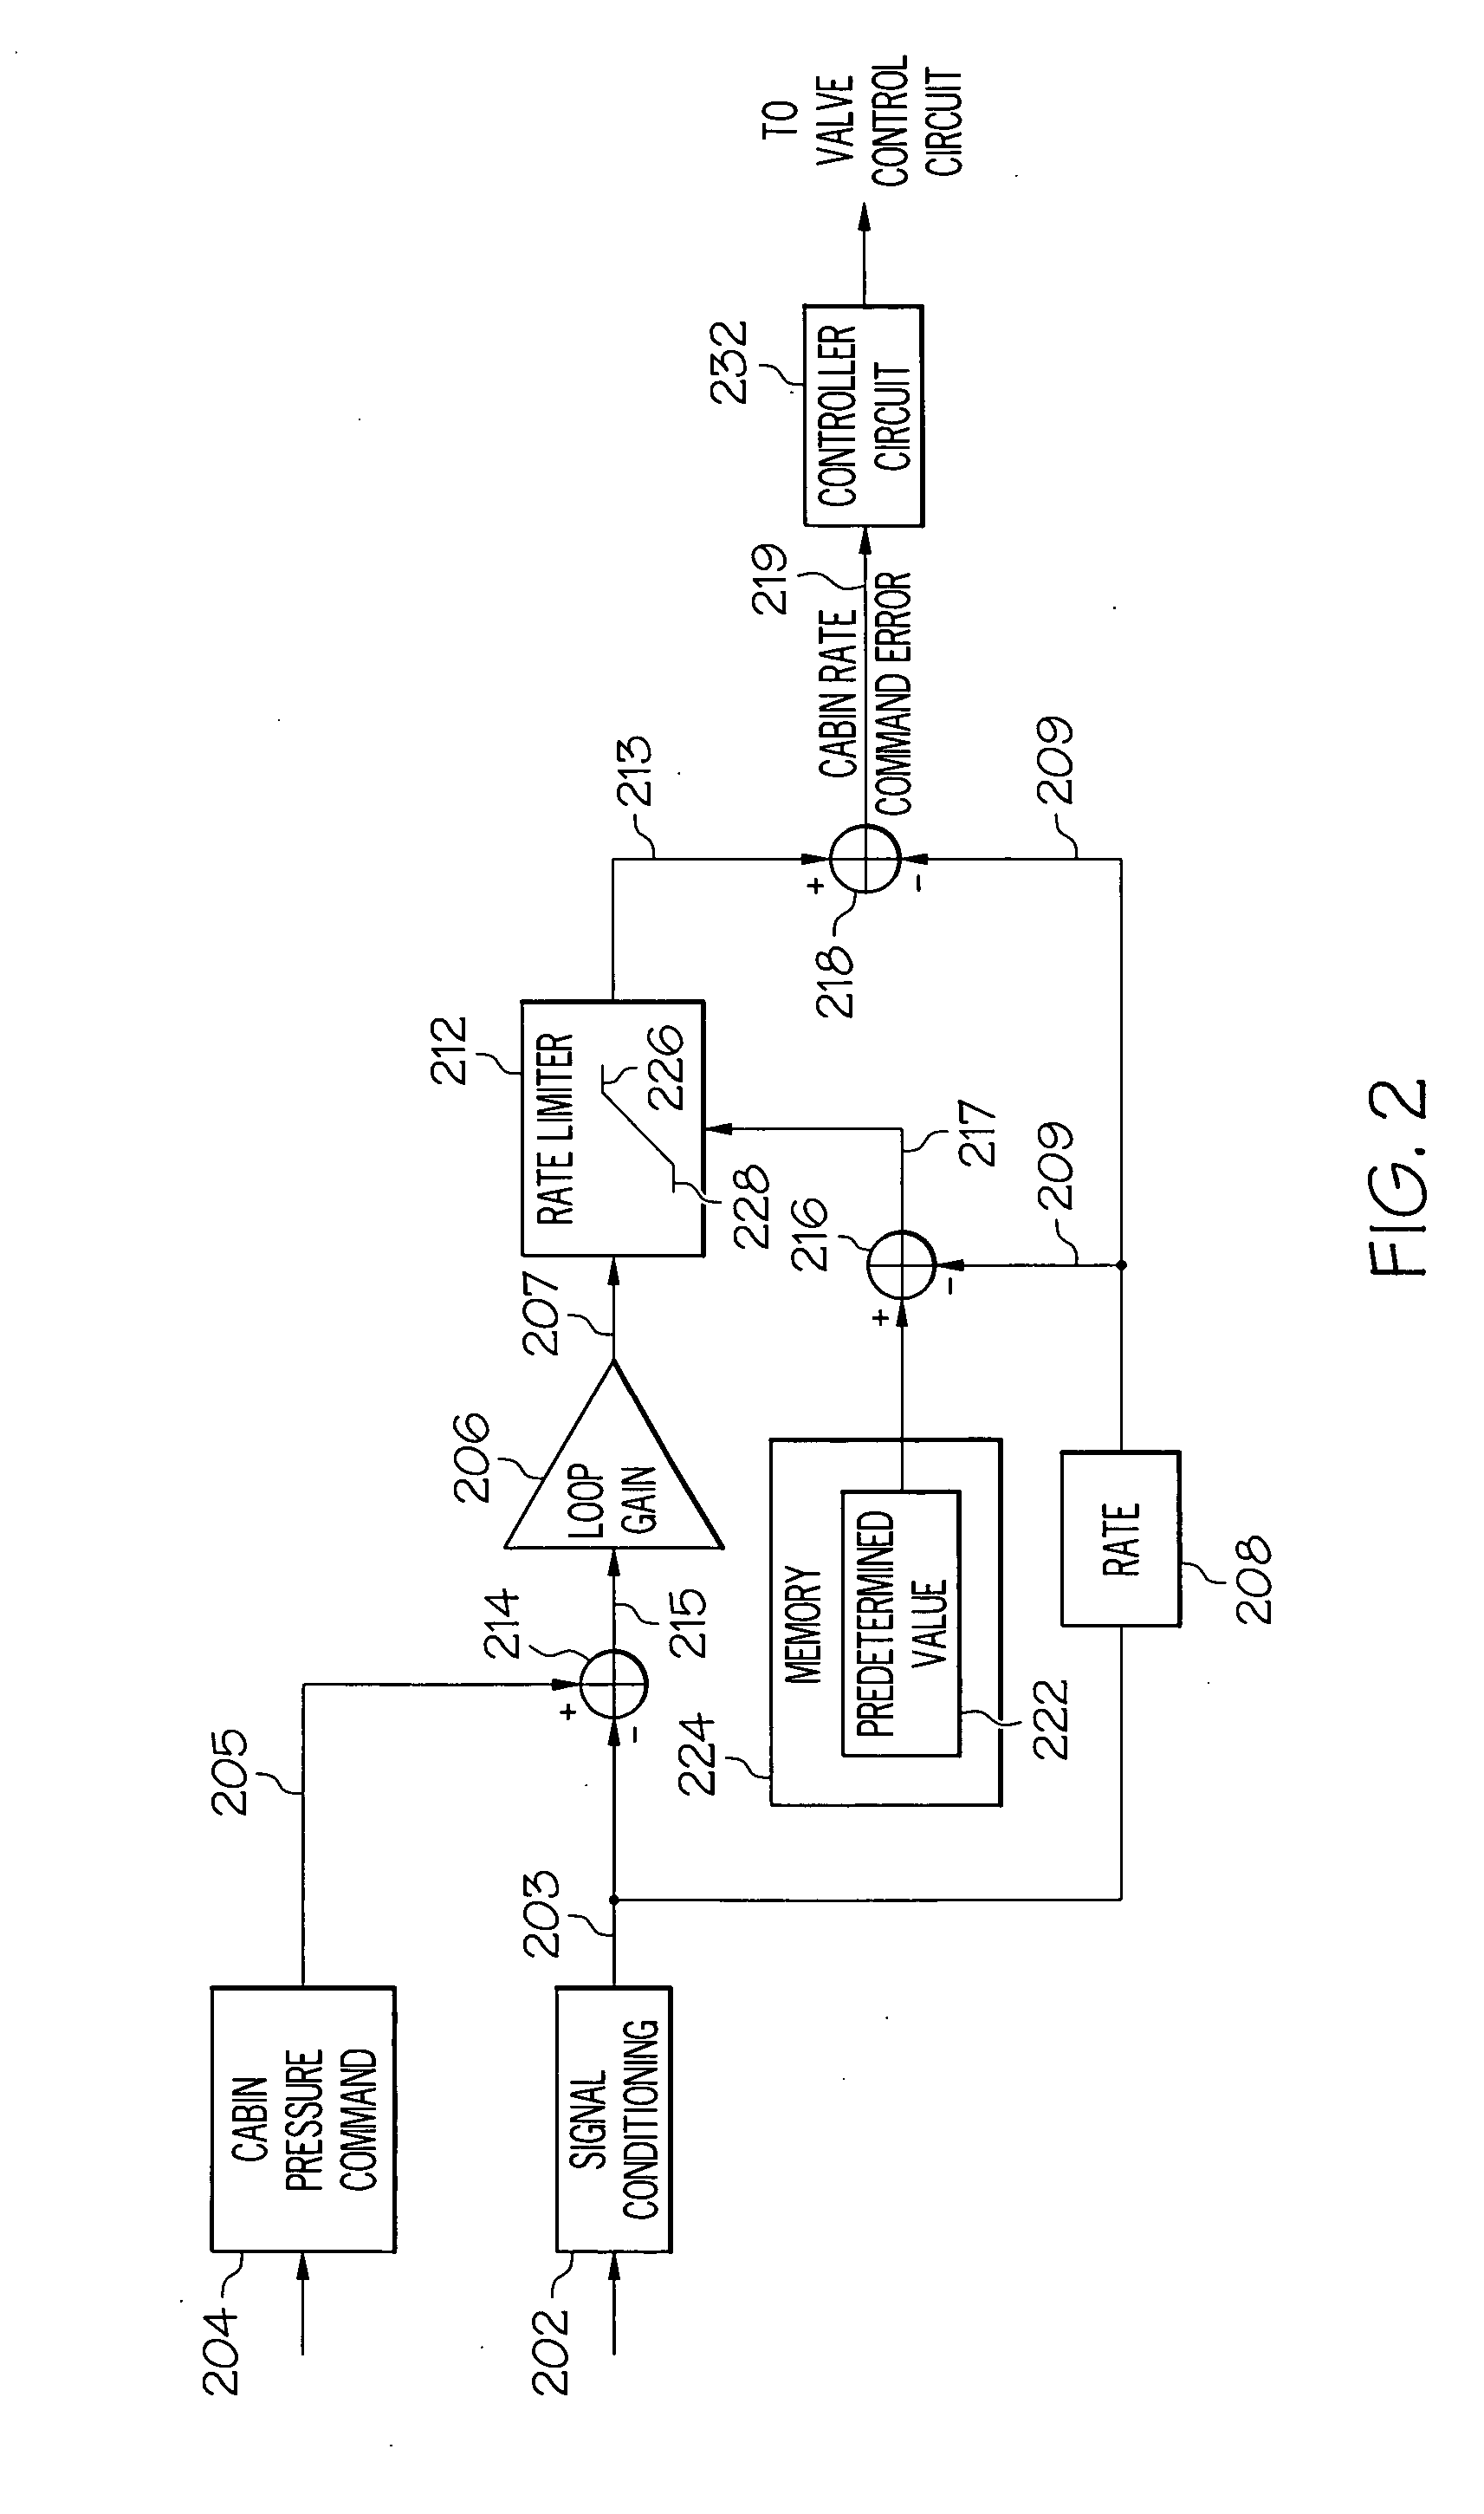 Aircraft cabin pressure control system and method that improves cabin pressurization during take-off